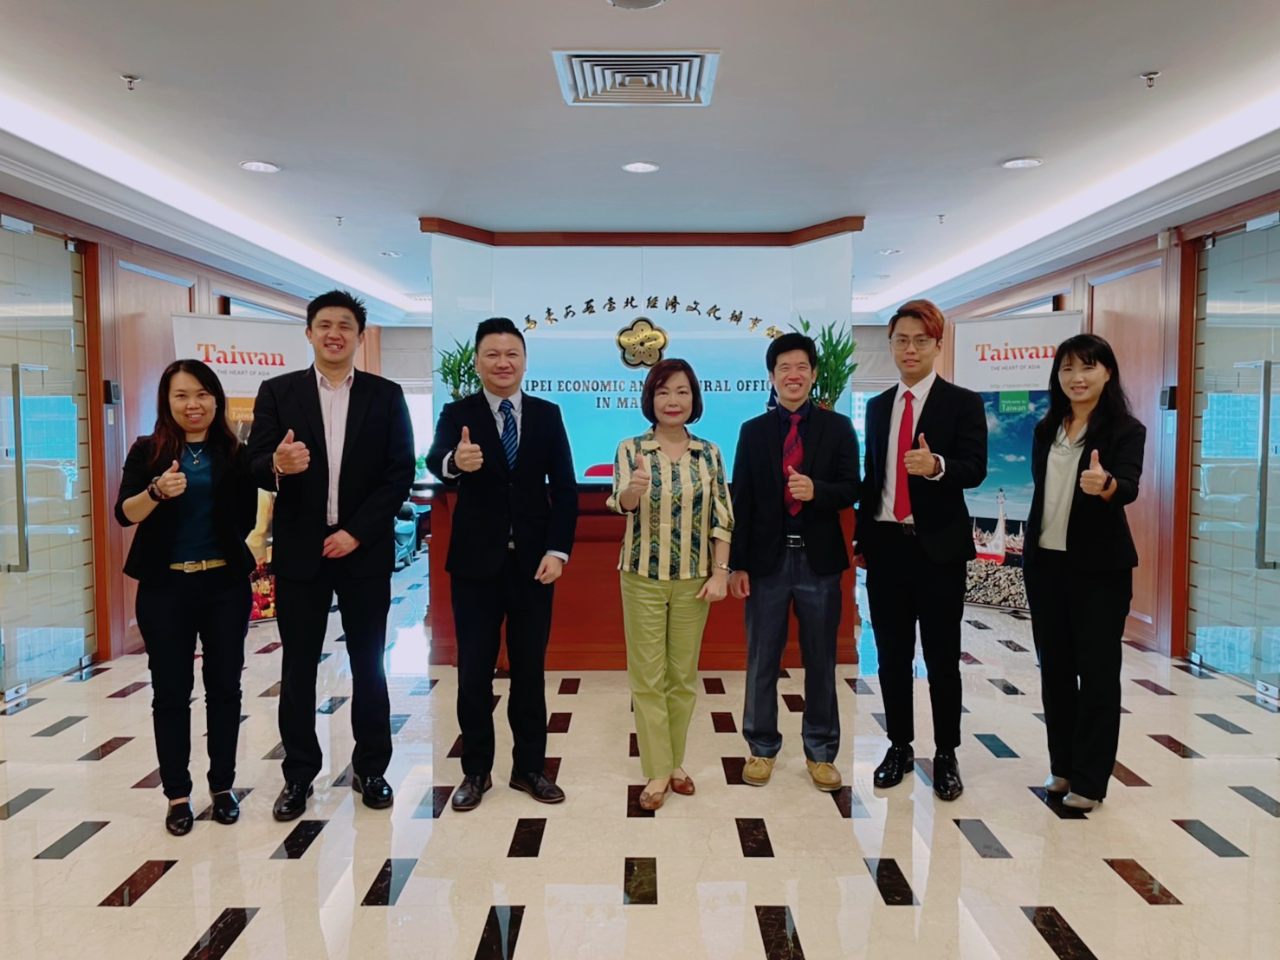 Representative Anne Hung takes a group photo with the president and committee members of Taiwan National Cheng Kung University Alumni Association.